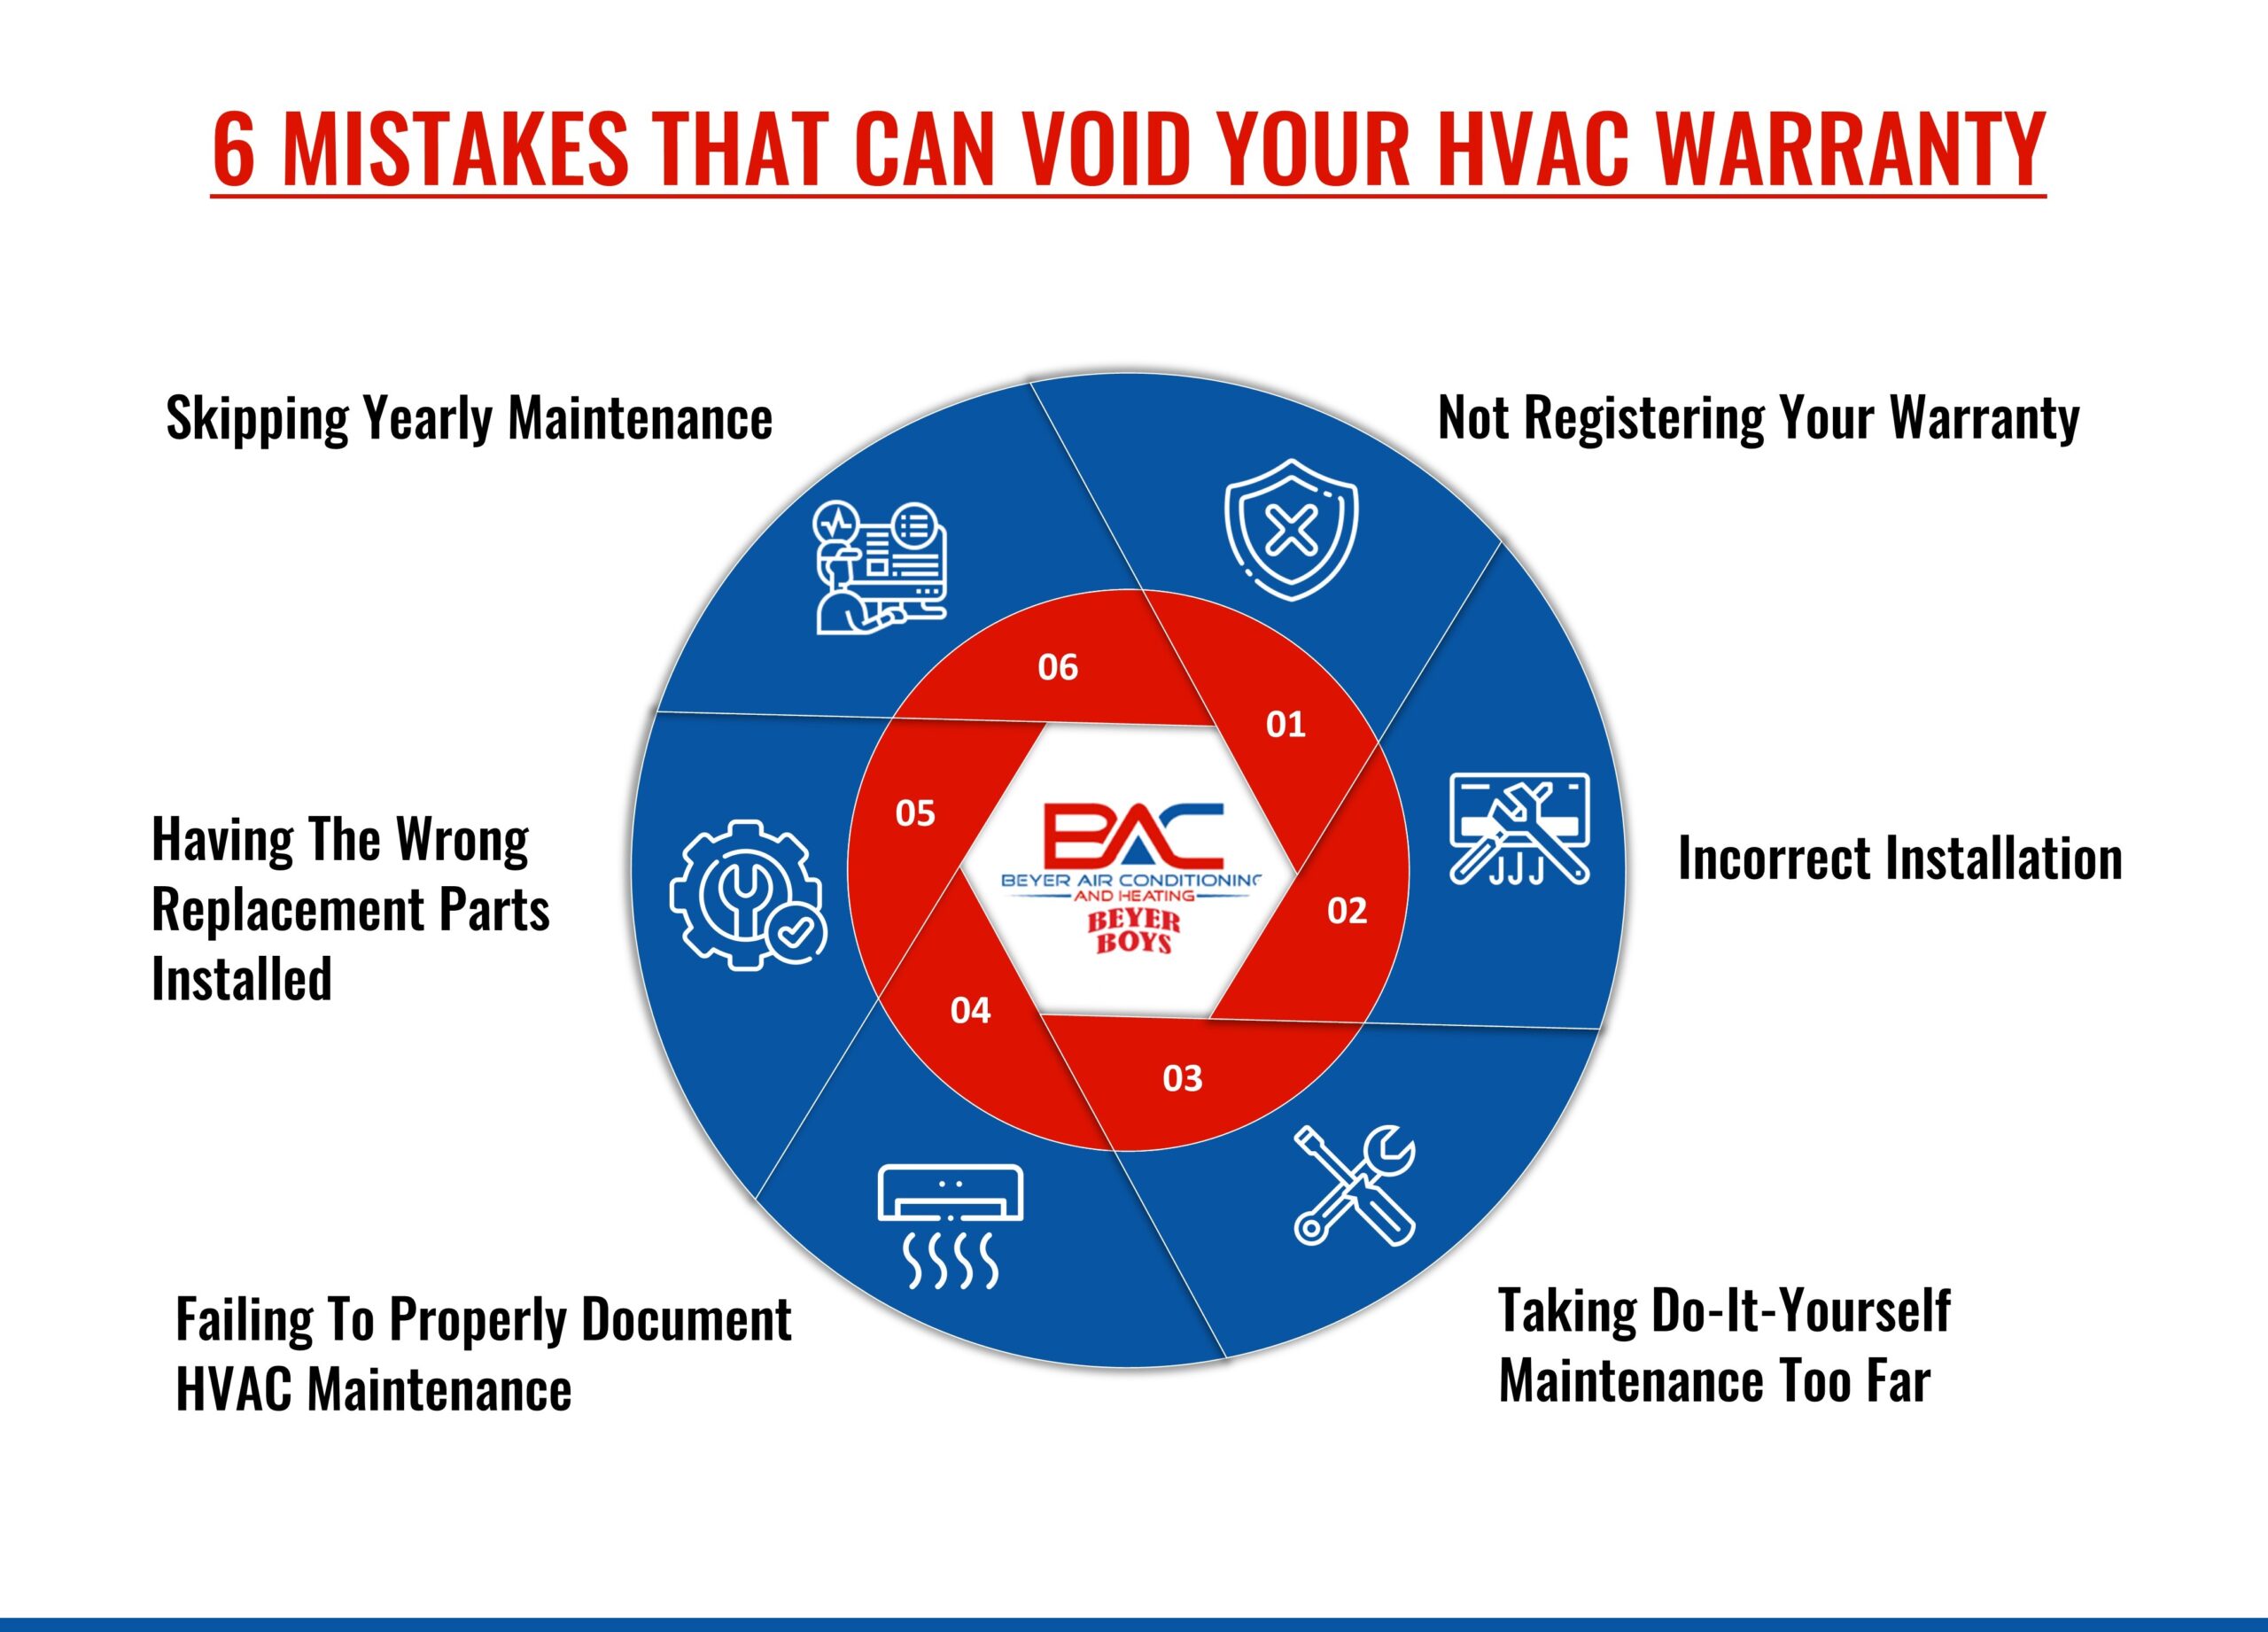 6 Mistakes That Can Void Your HVAC Warranty